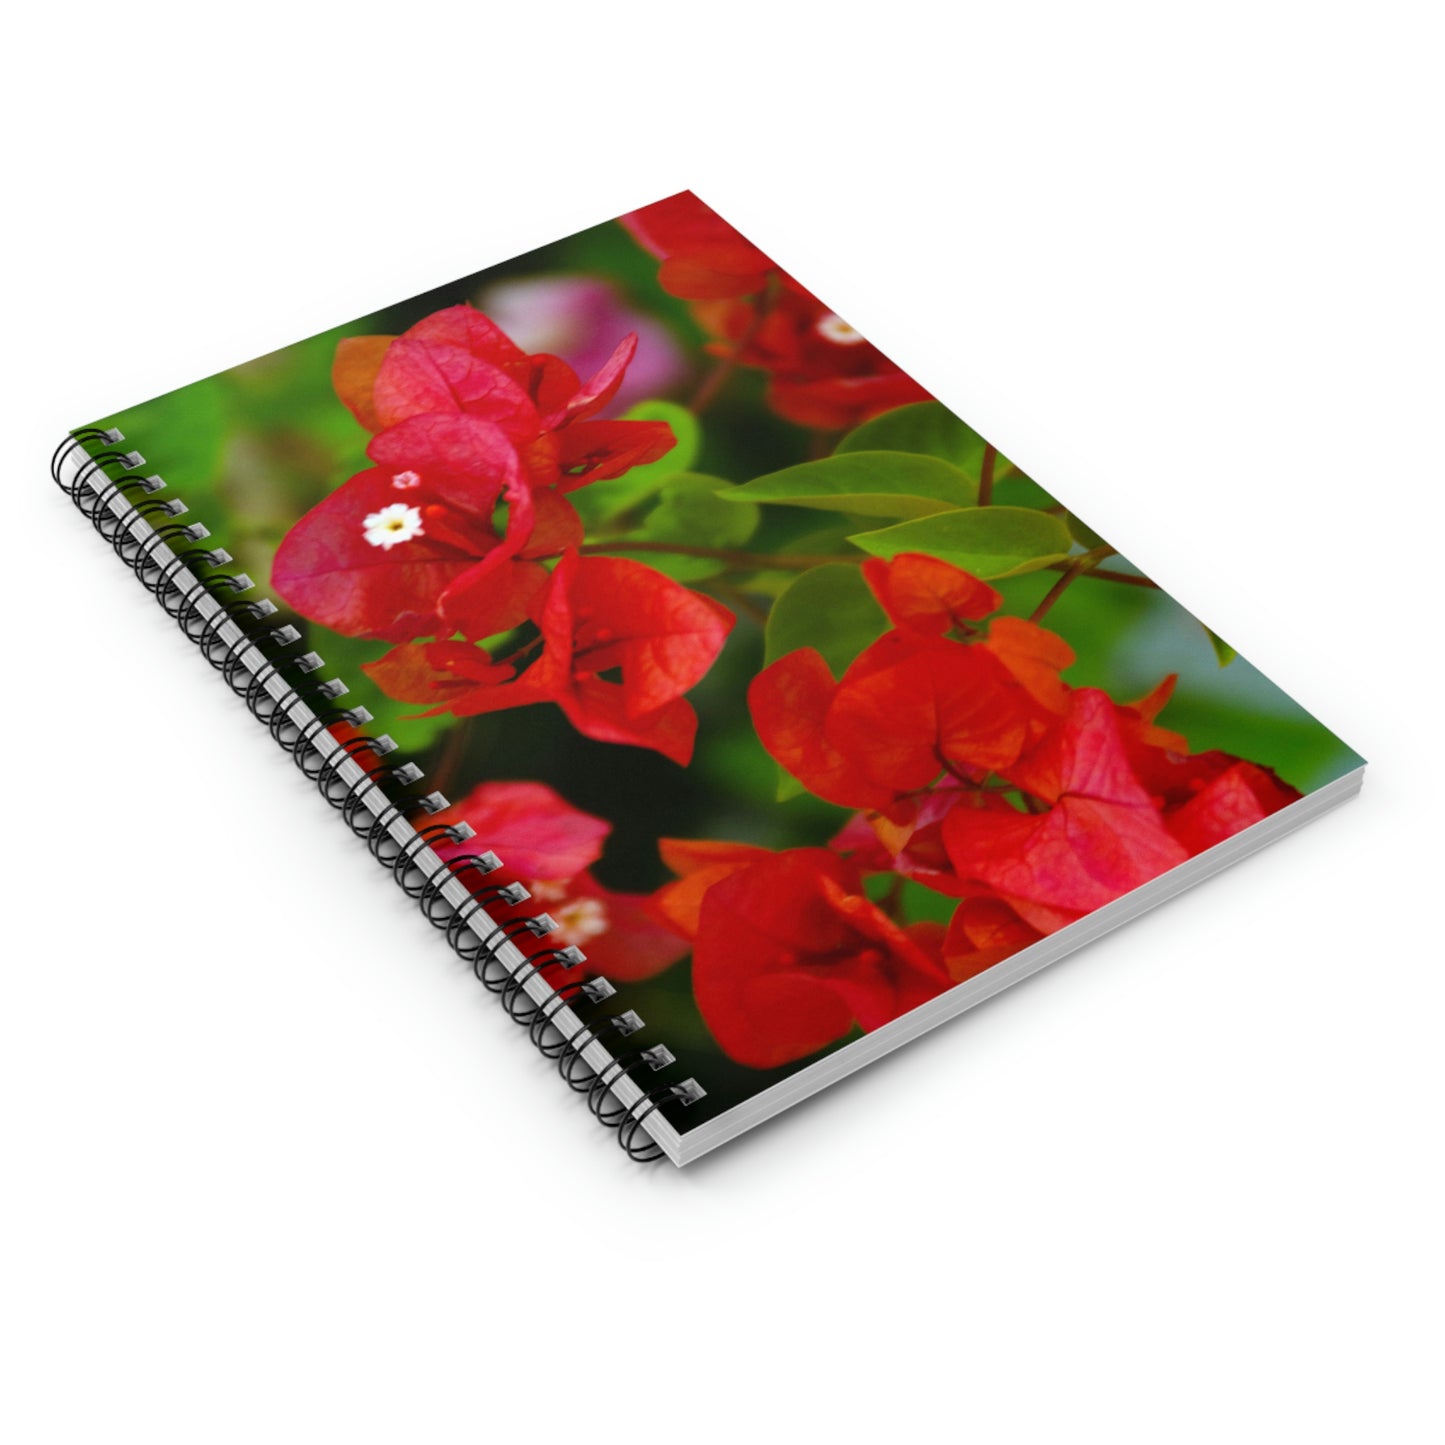 Flowers 28 Spiral Notebook - Ruled Line